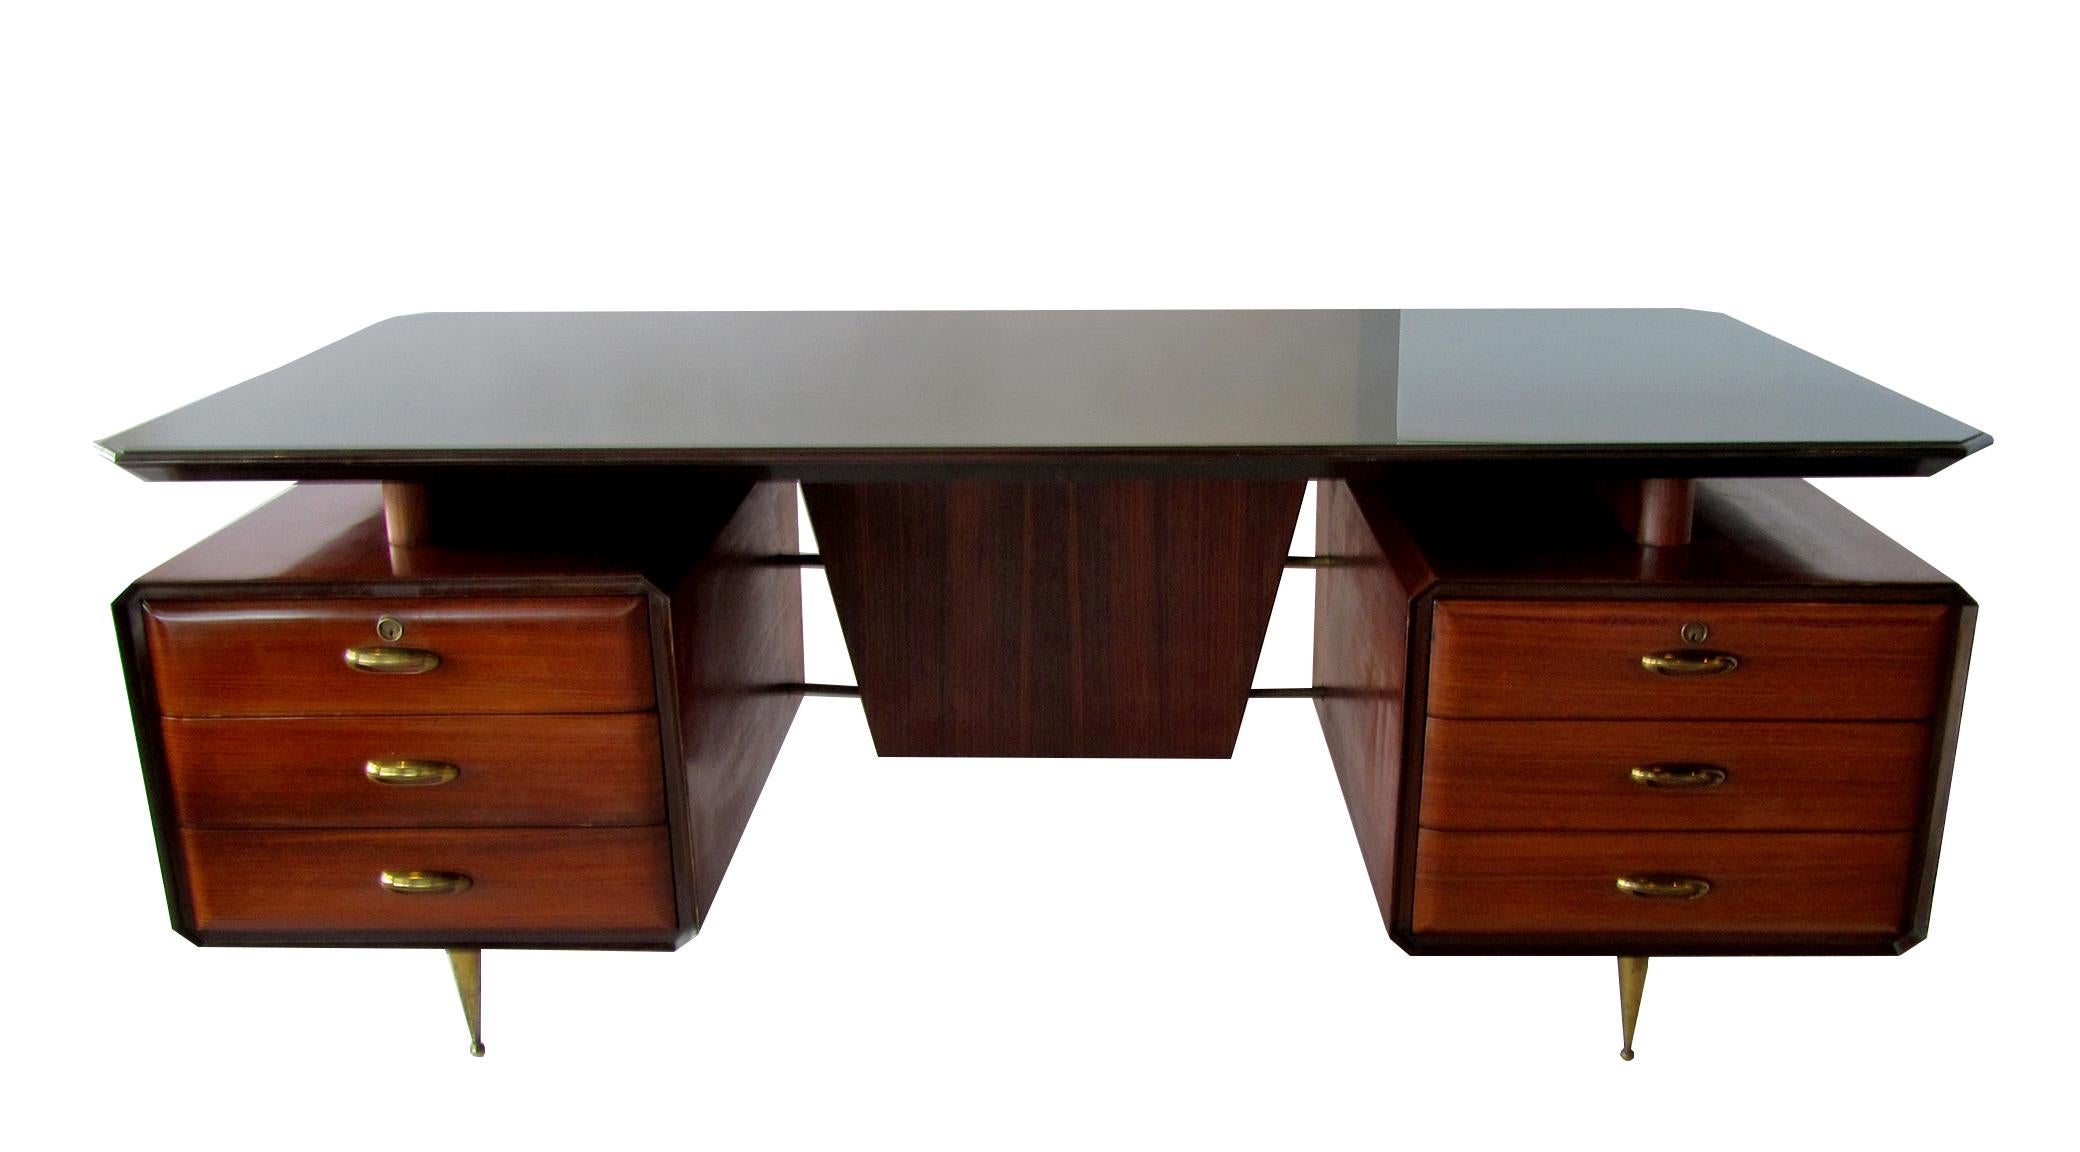 An exceptional desk attributed to Melchiorre Bega (1898-1976), circa 1955, Italian architect and designer, from a long line of cabinet makers. You can tell he paid attention by the details in this piece. Constructed of rosewood, mahogany, glass and